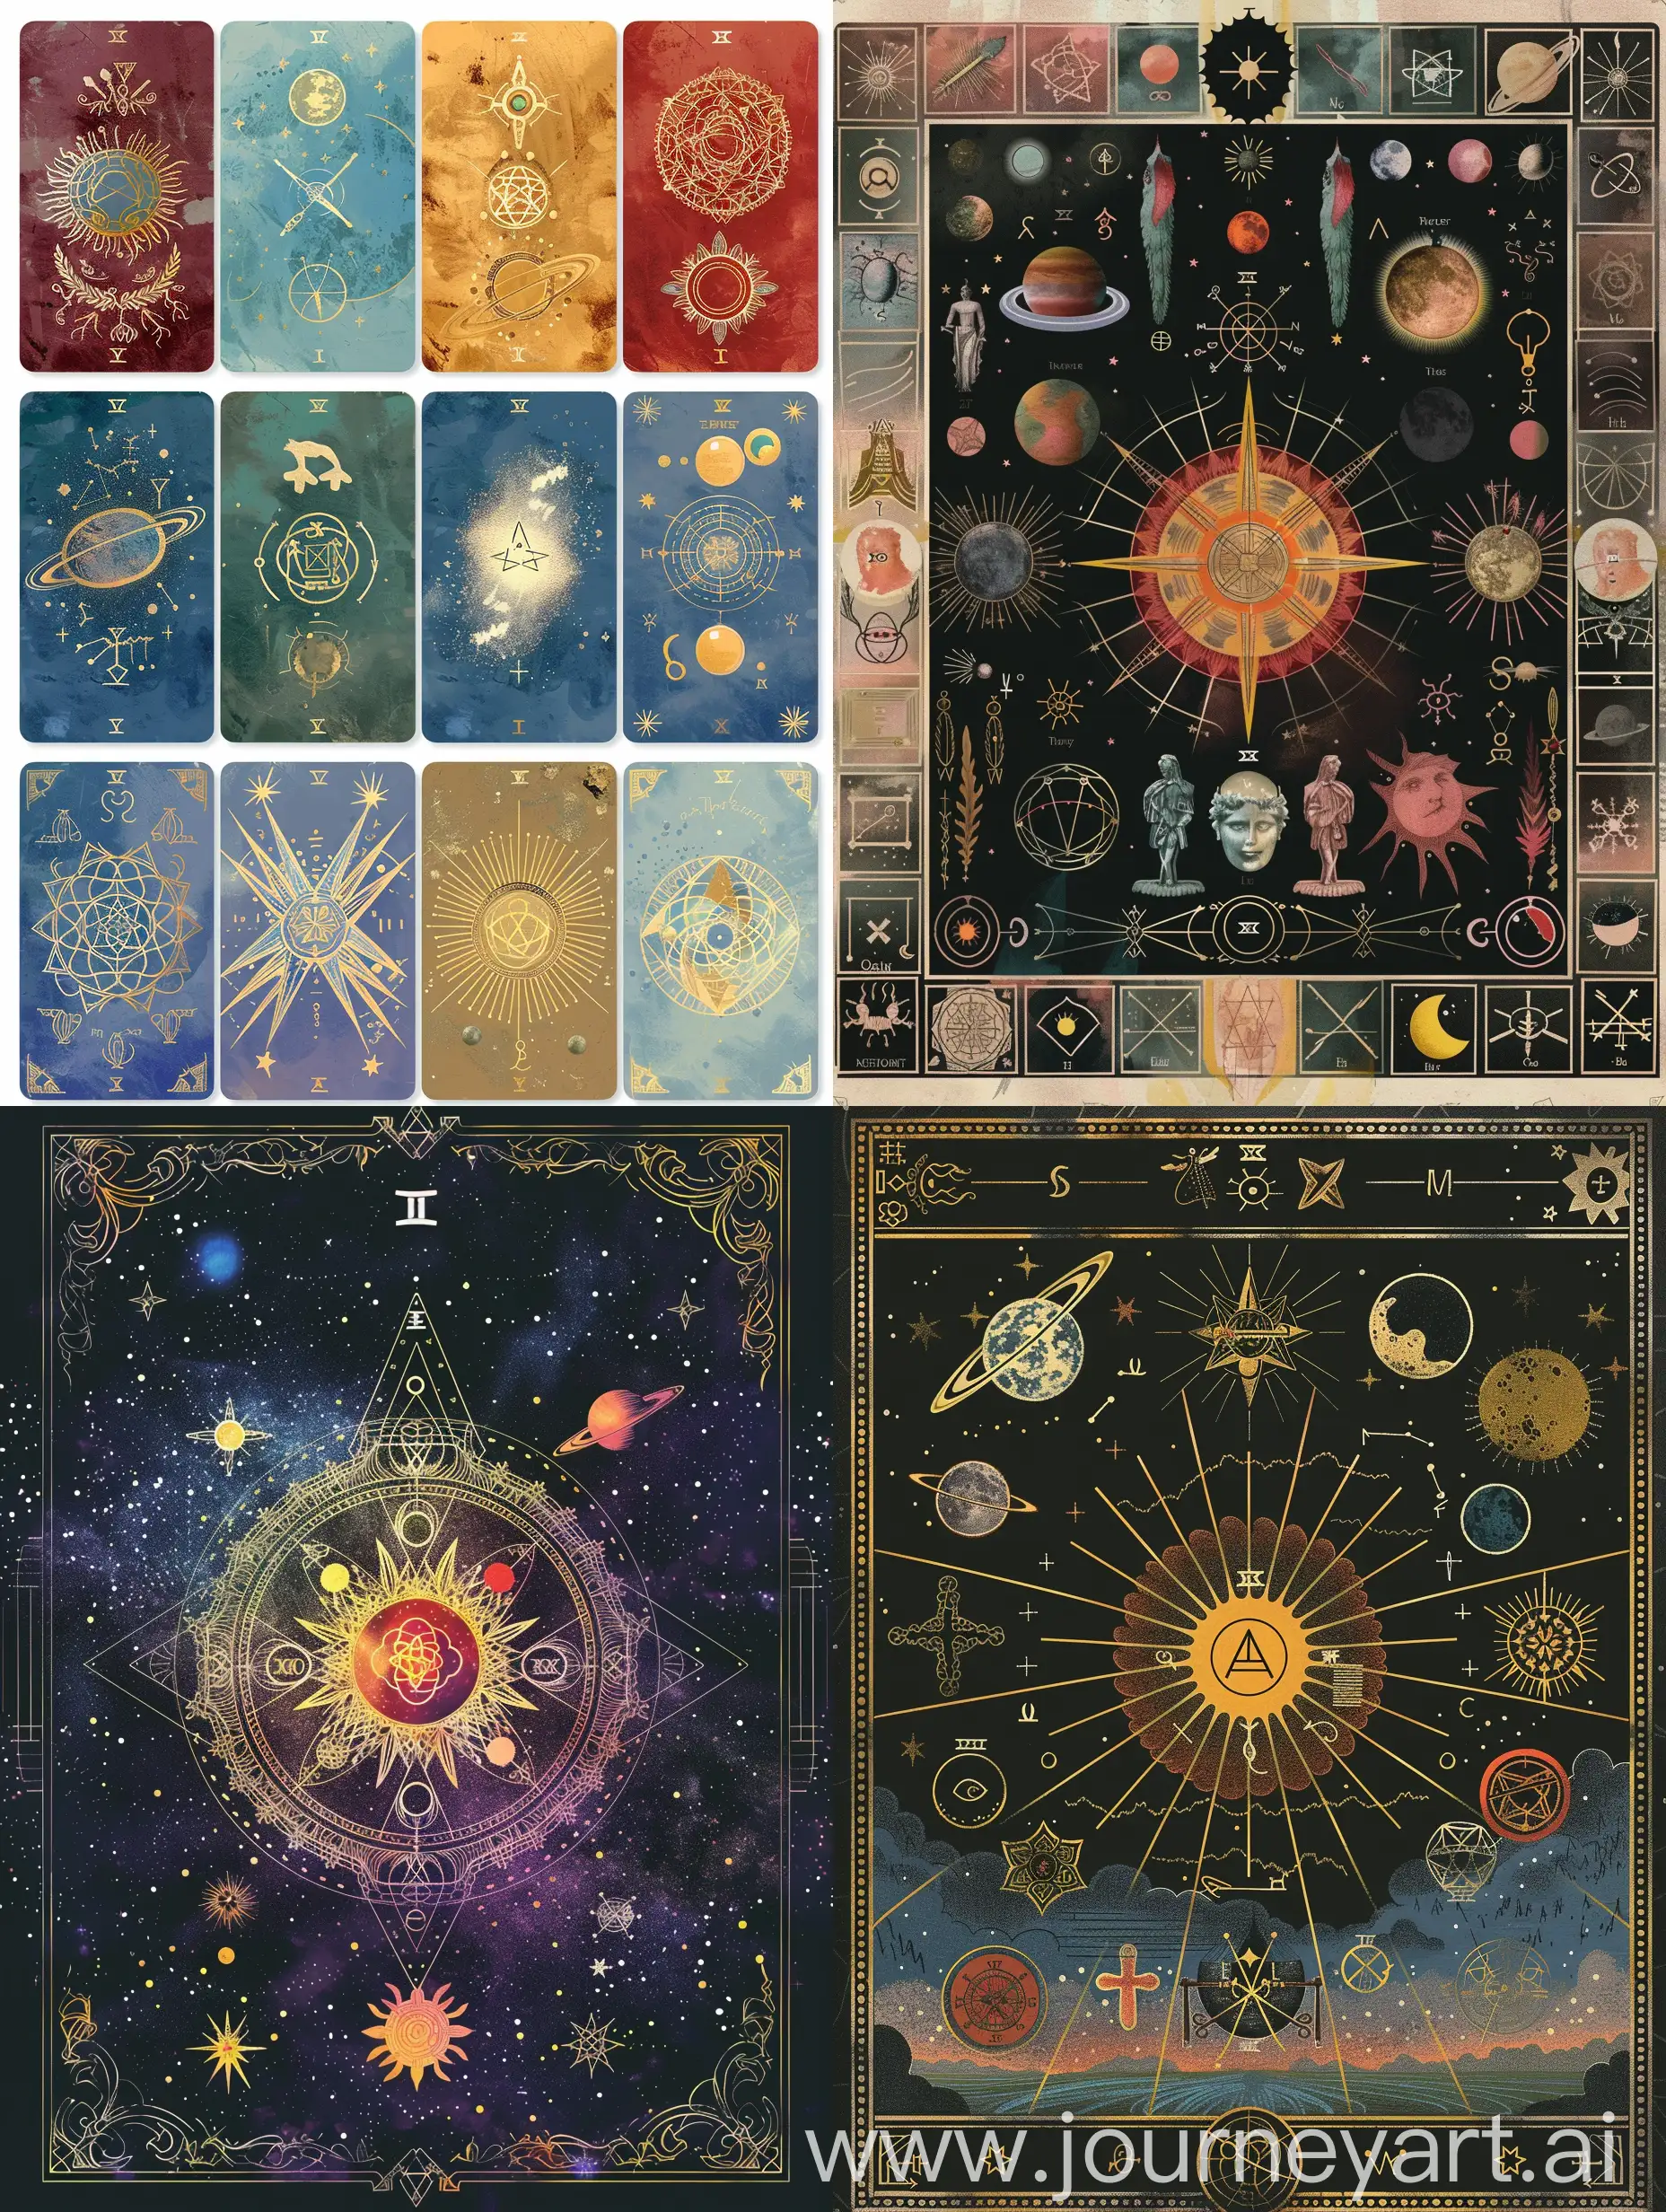 write a cover for tarot cards on which to display the symbols of planets, zadiac signs, chakras, elements